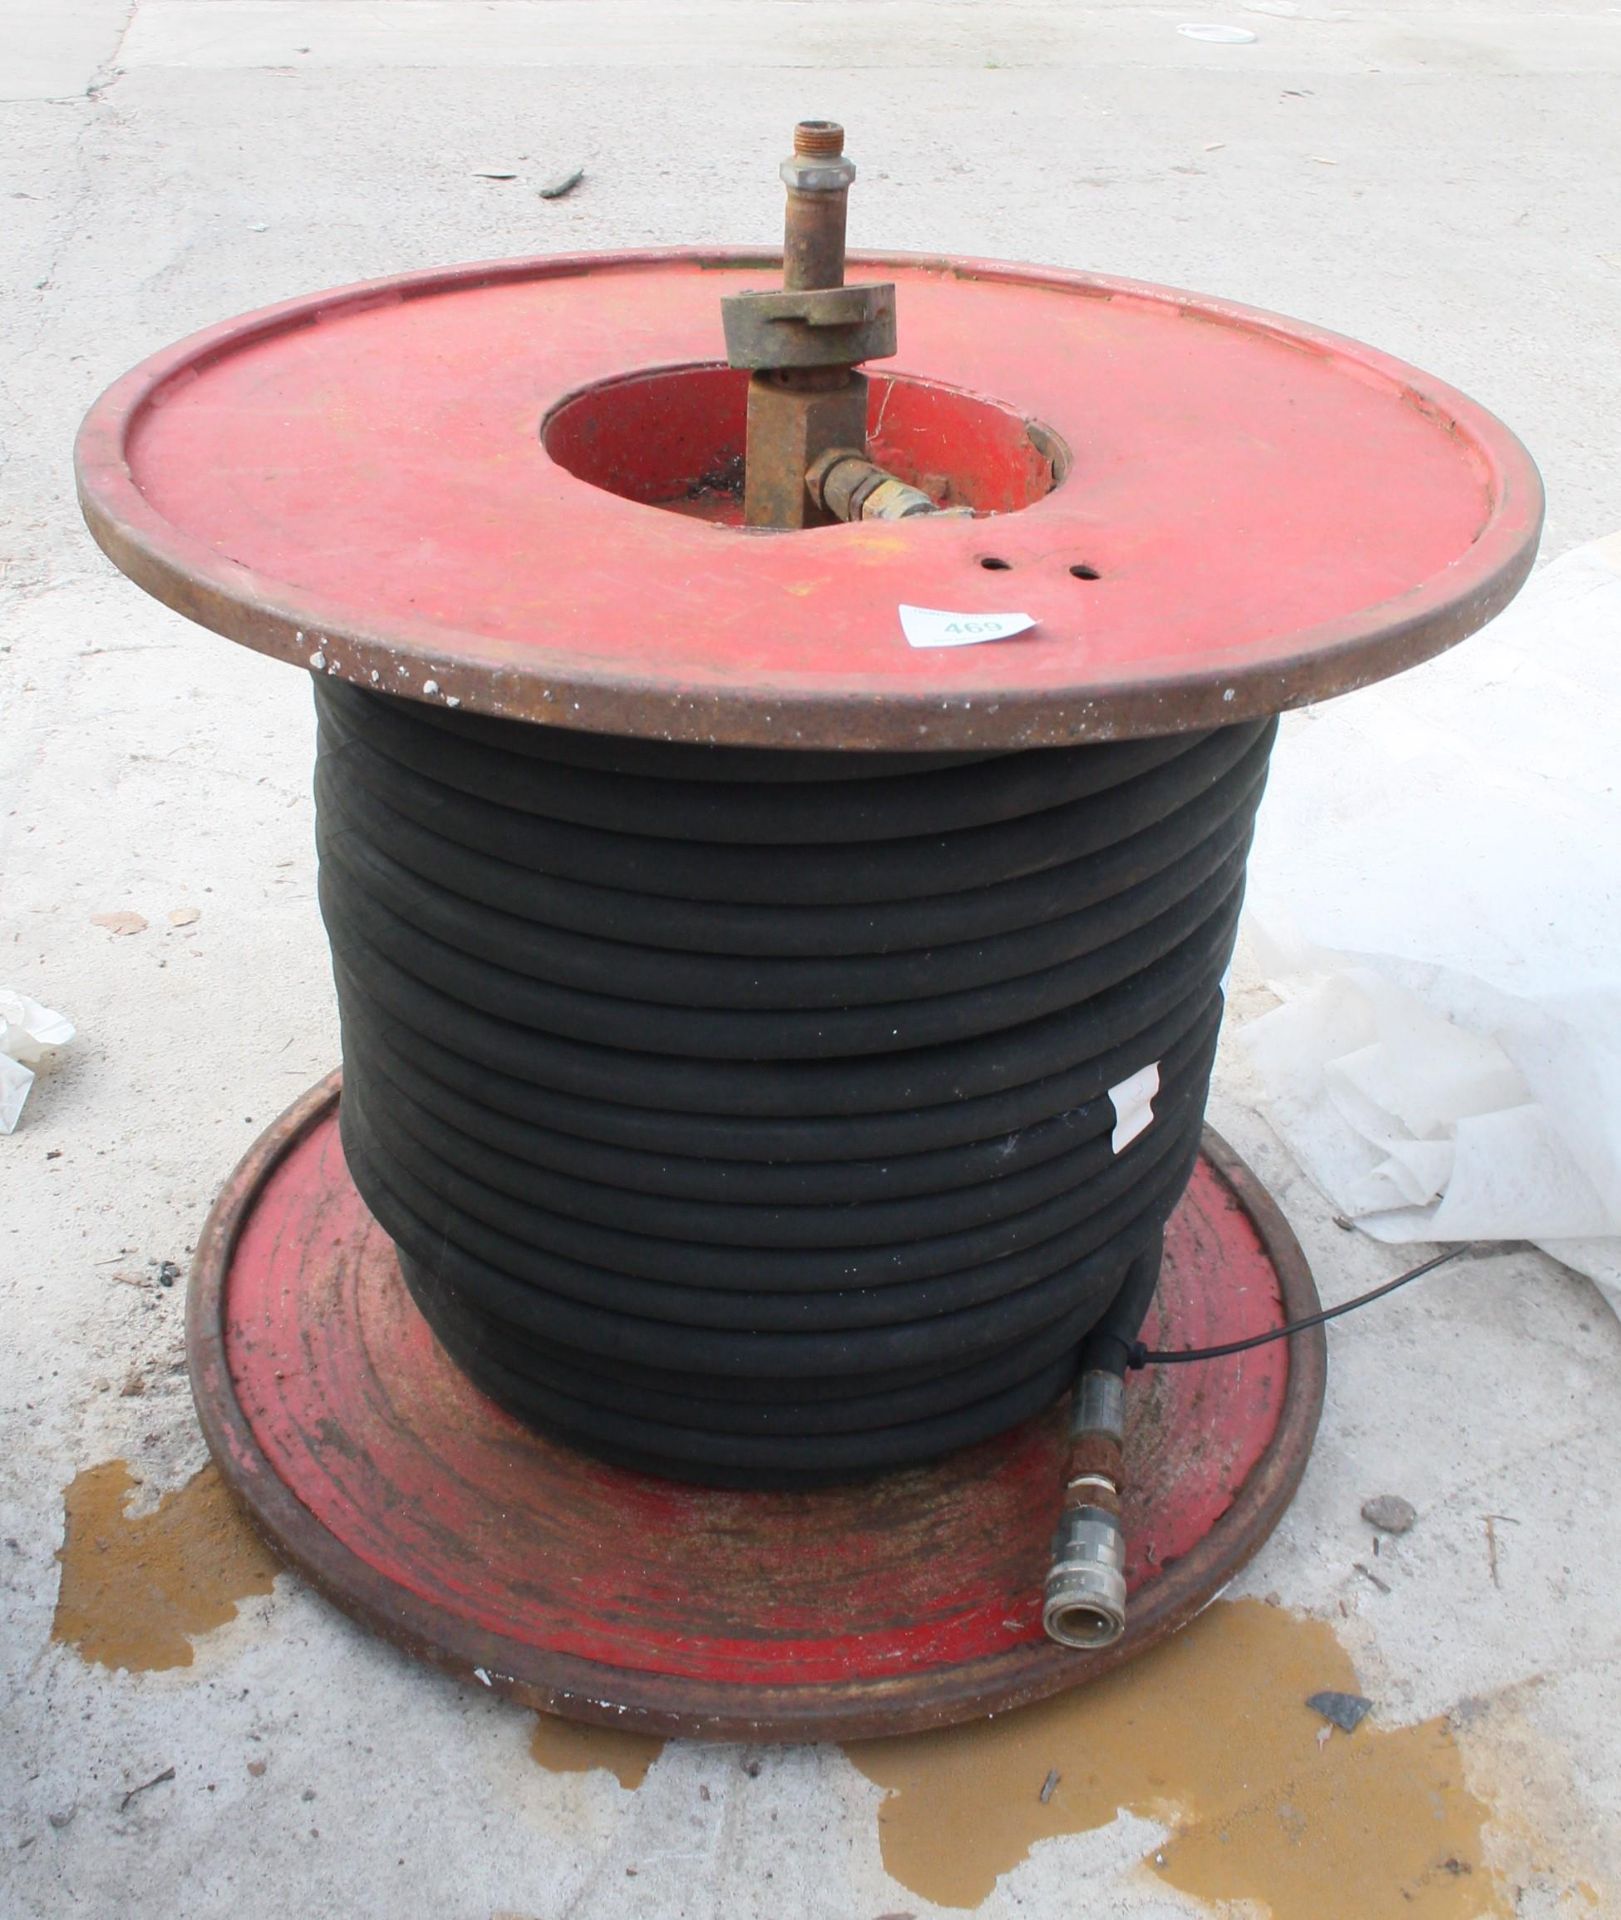 INDUSTRIAL FIRE REEL AND HOSE IN WORKING ORDER NO VAT - Image 2 of 2